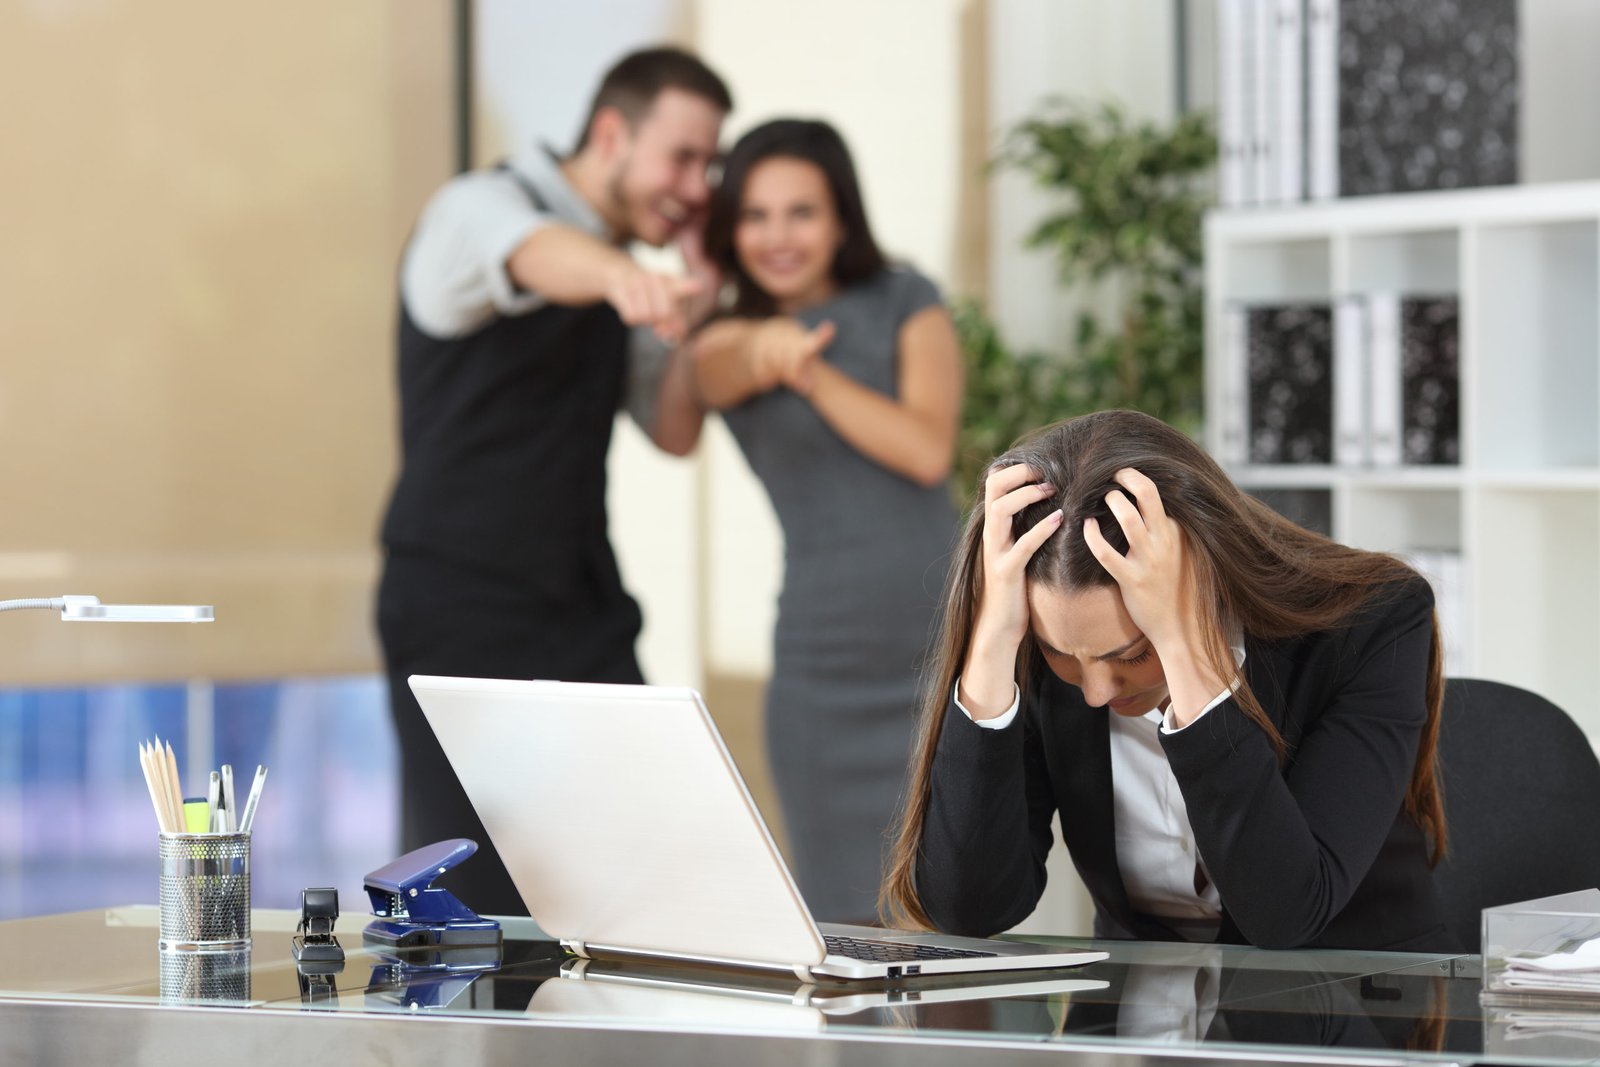 Manage workplace bullying with the help of these tips